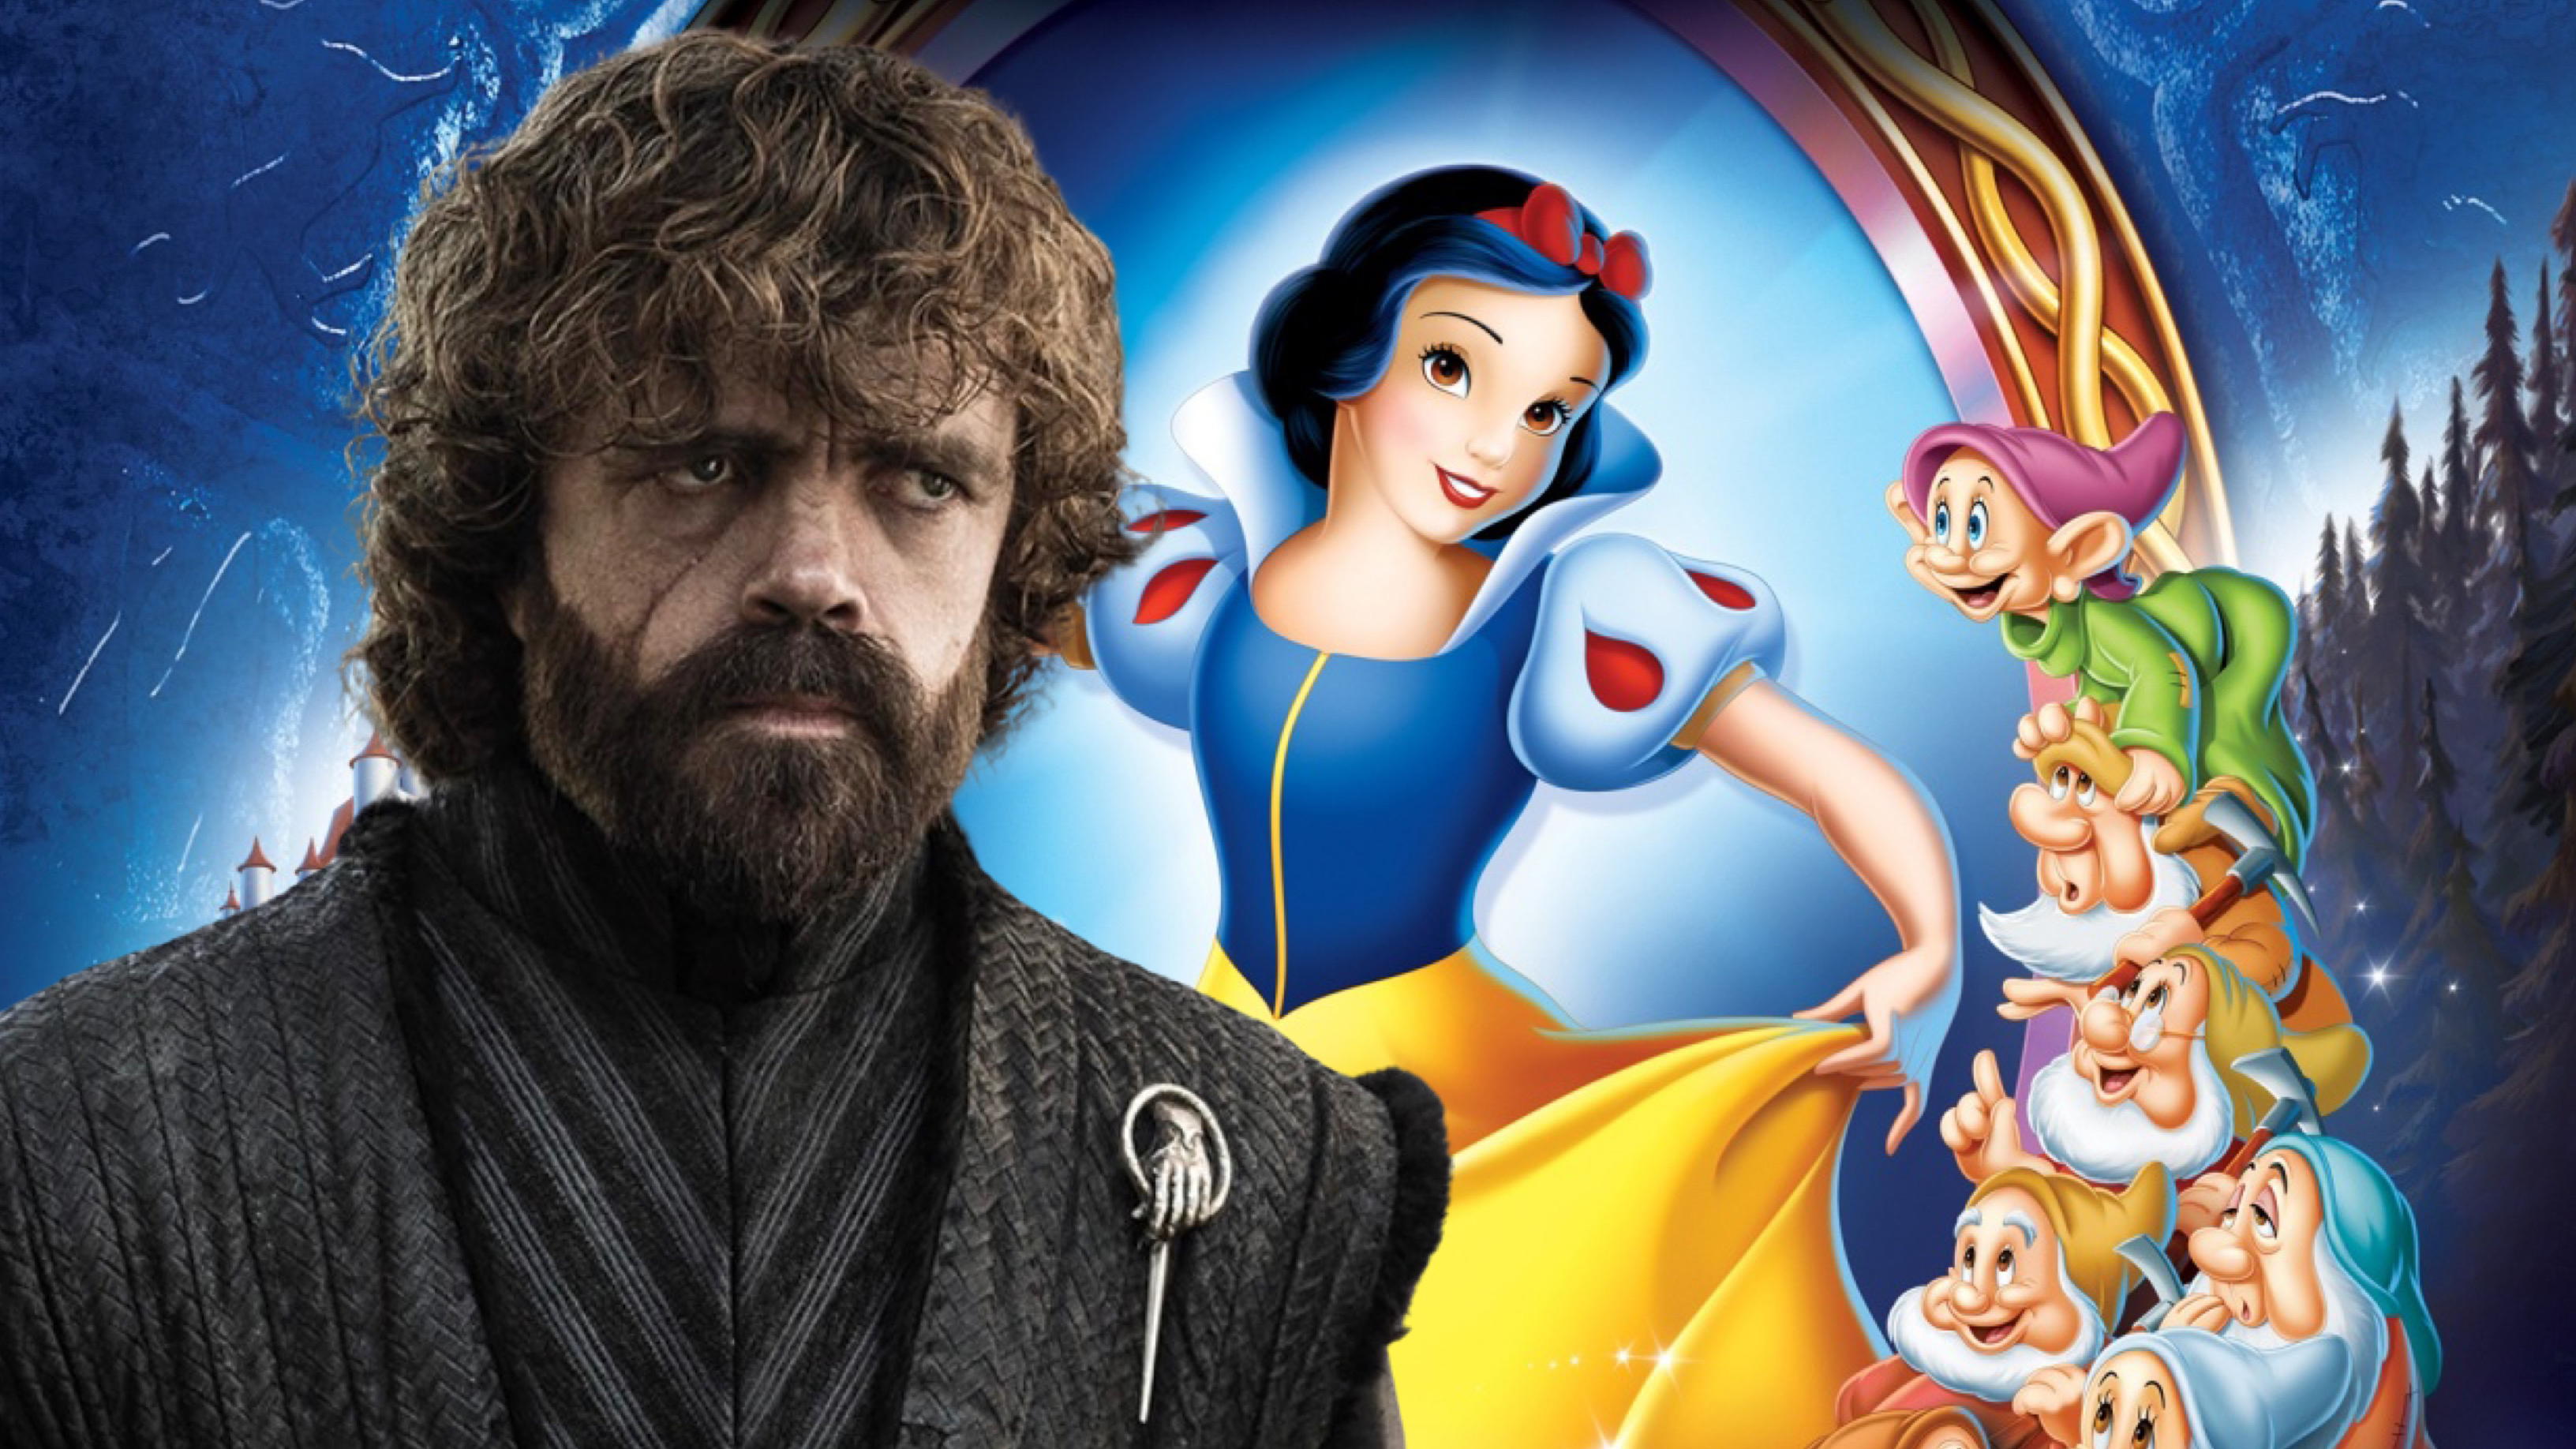 Peter Dinklage on Disney’s ‘Snow White and the Seven Dwarfs’ Remake